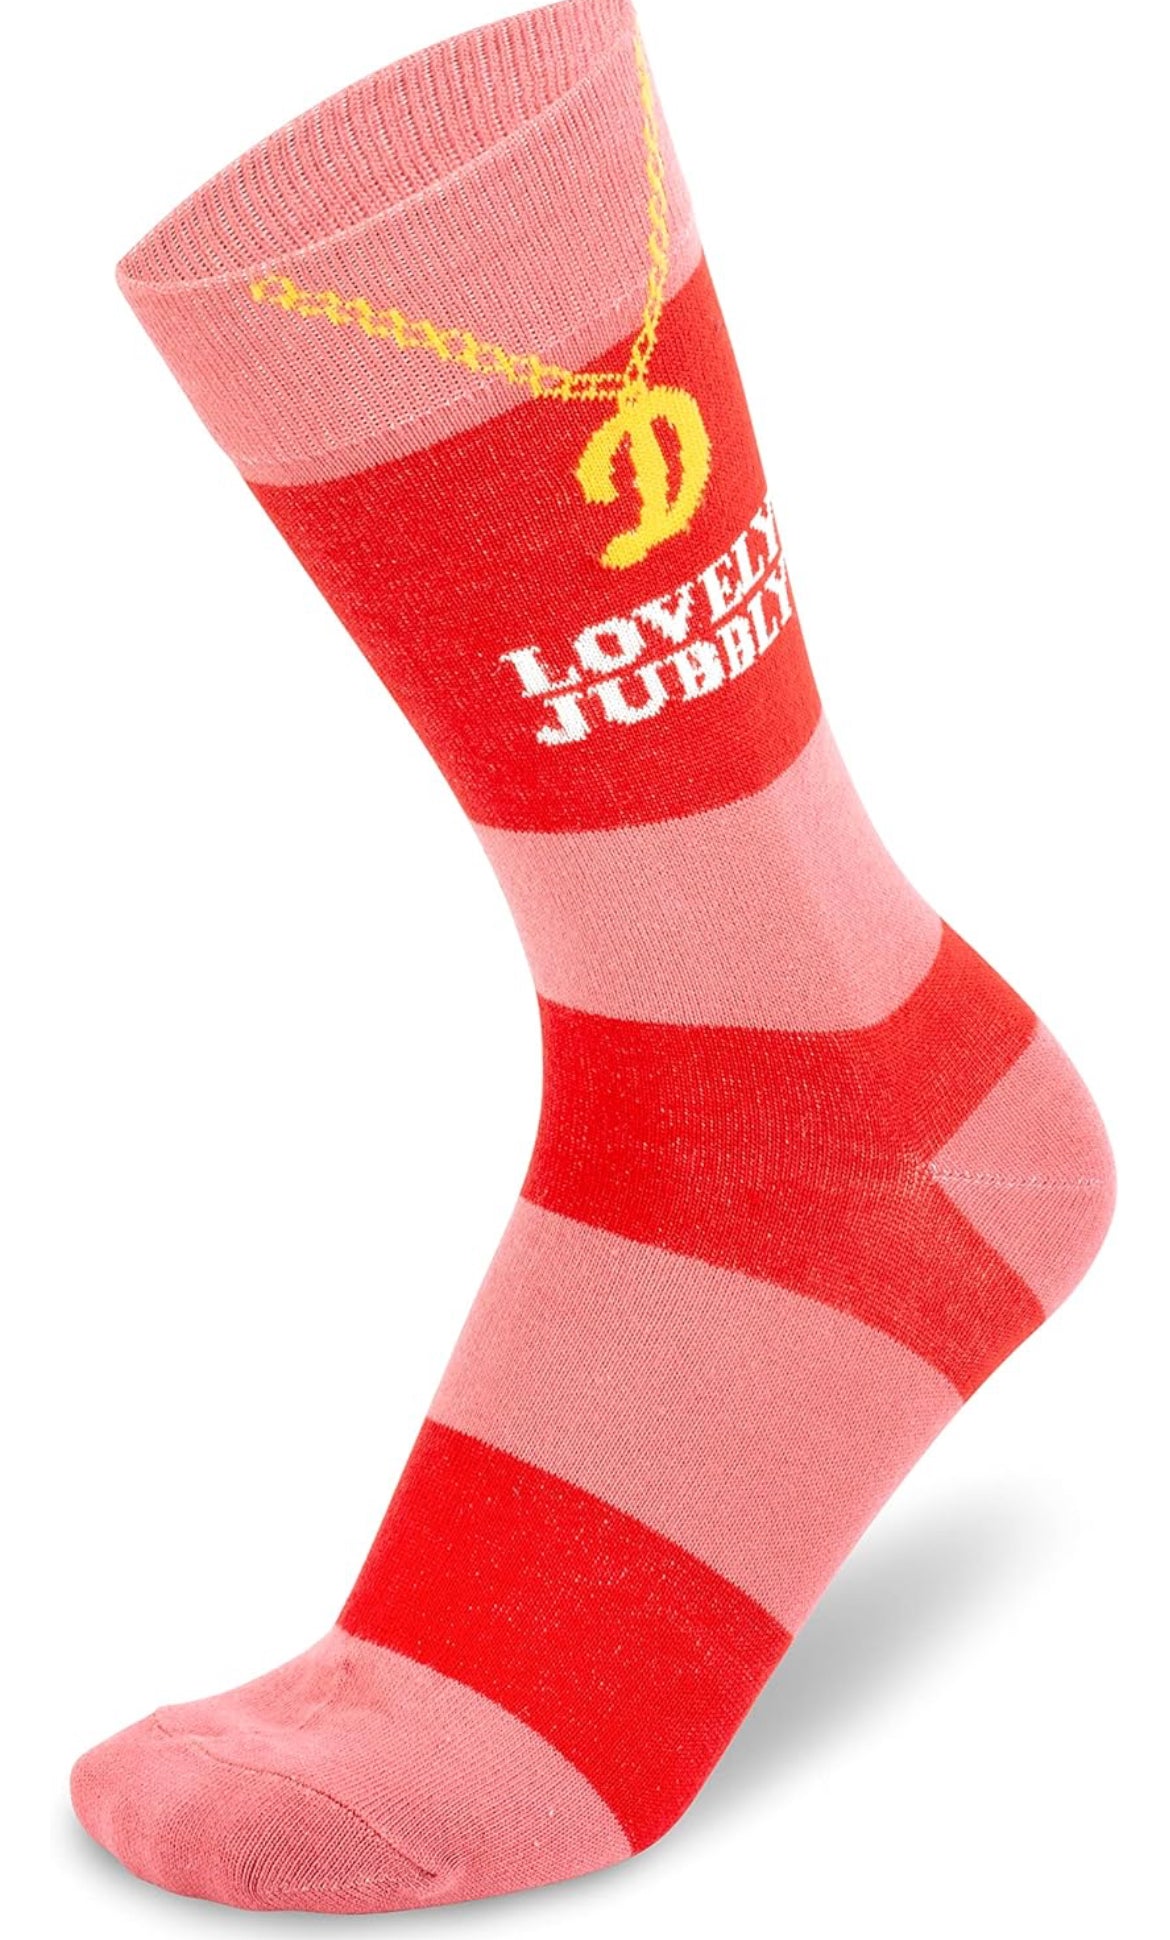 Only Fools and Horses - Pack of 3 Socks